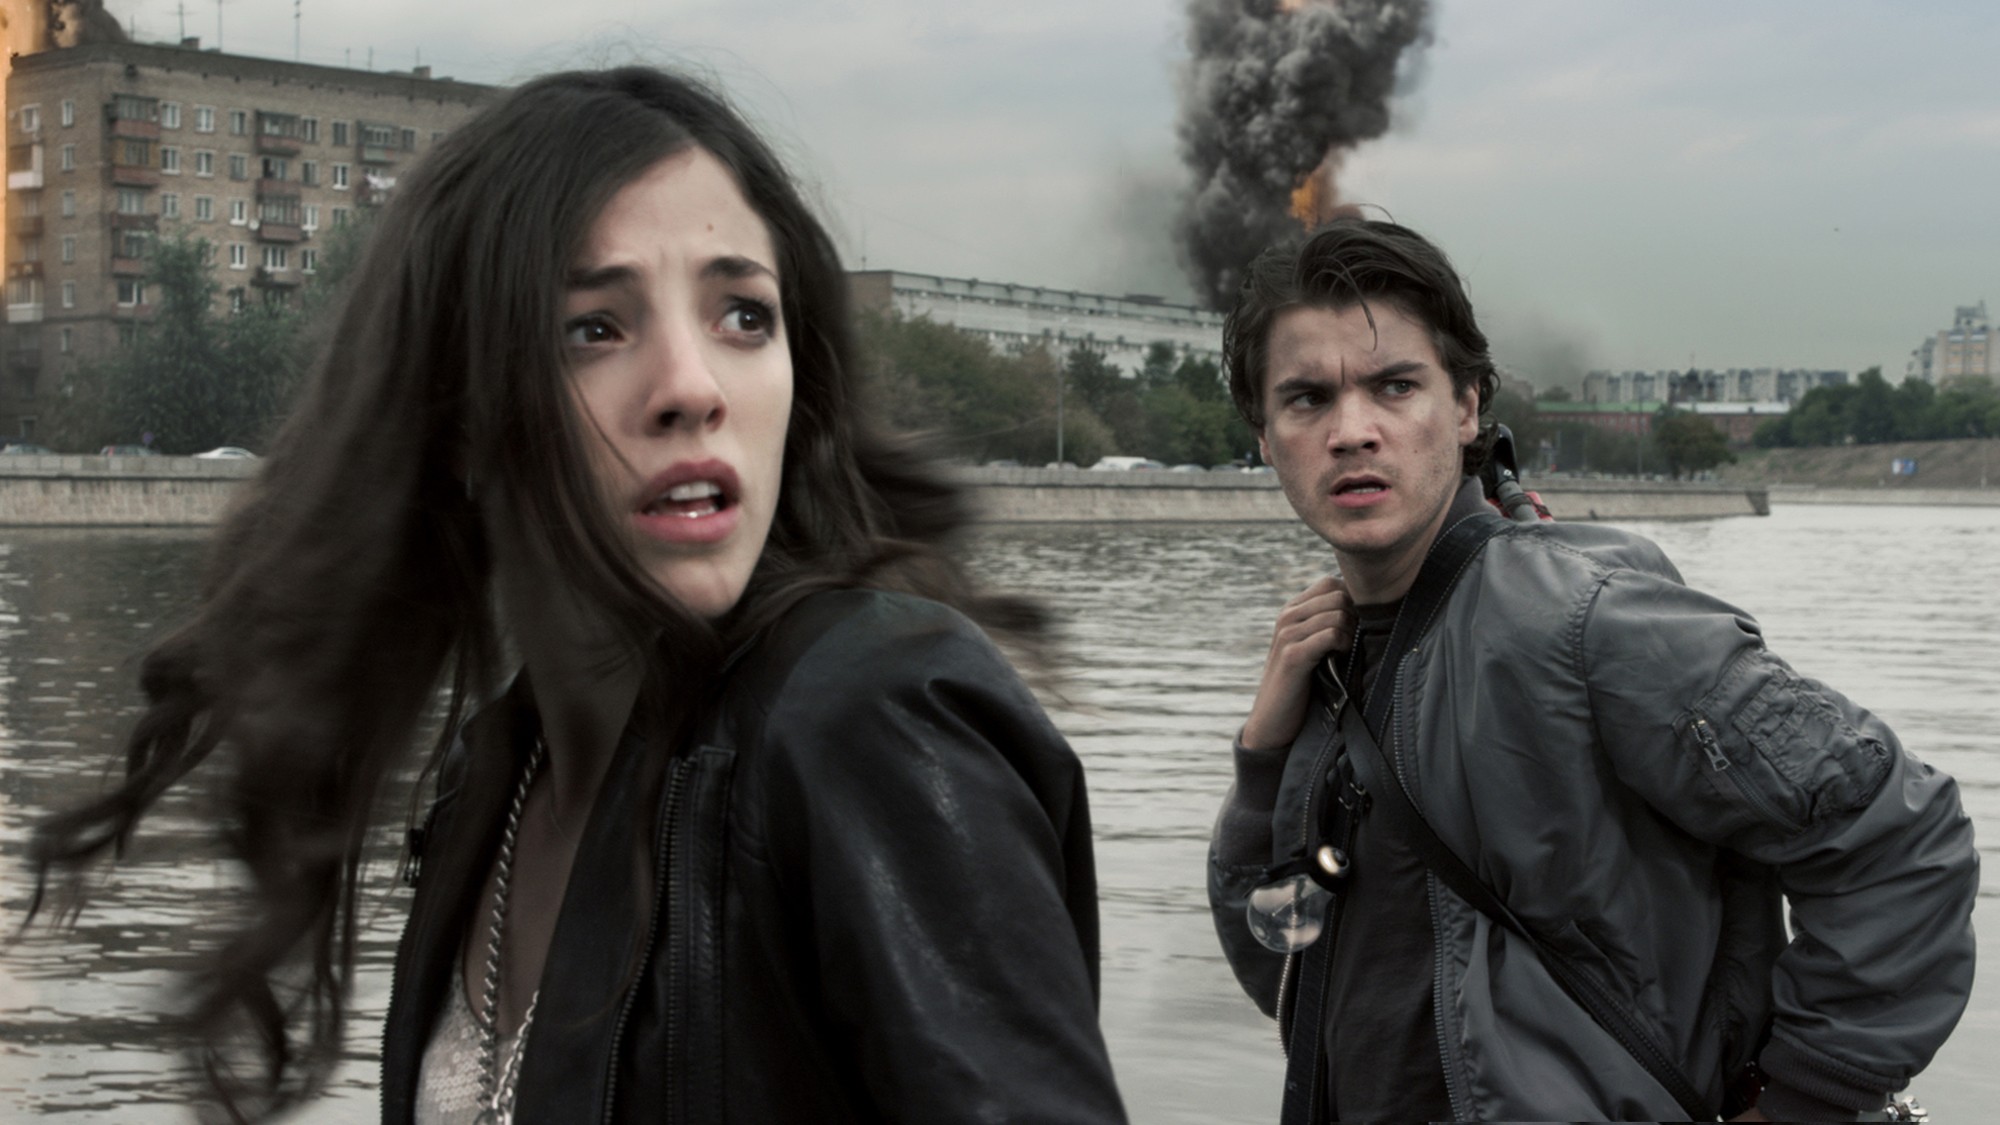 Olivia Thirlby stars as Natalie and Emile Hirsch stars as Sean in Summit Entertainment's The Darkest Hour (2011)